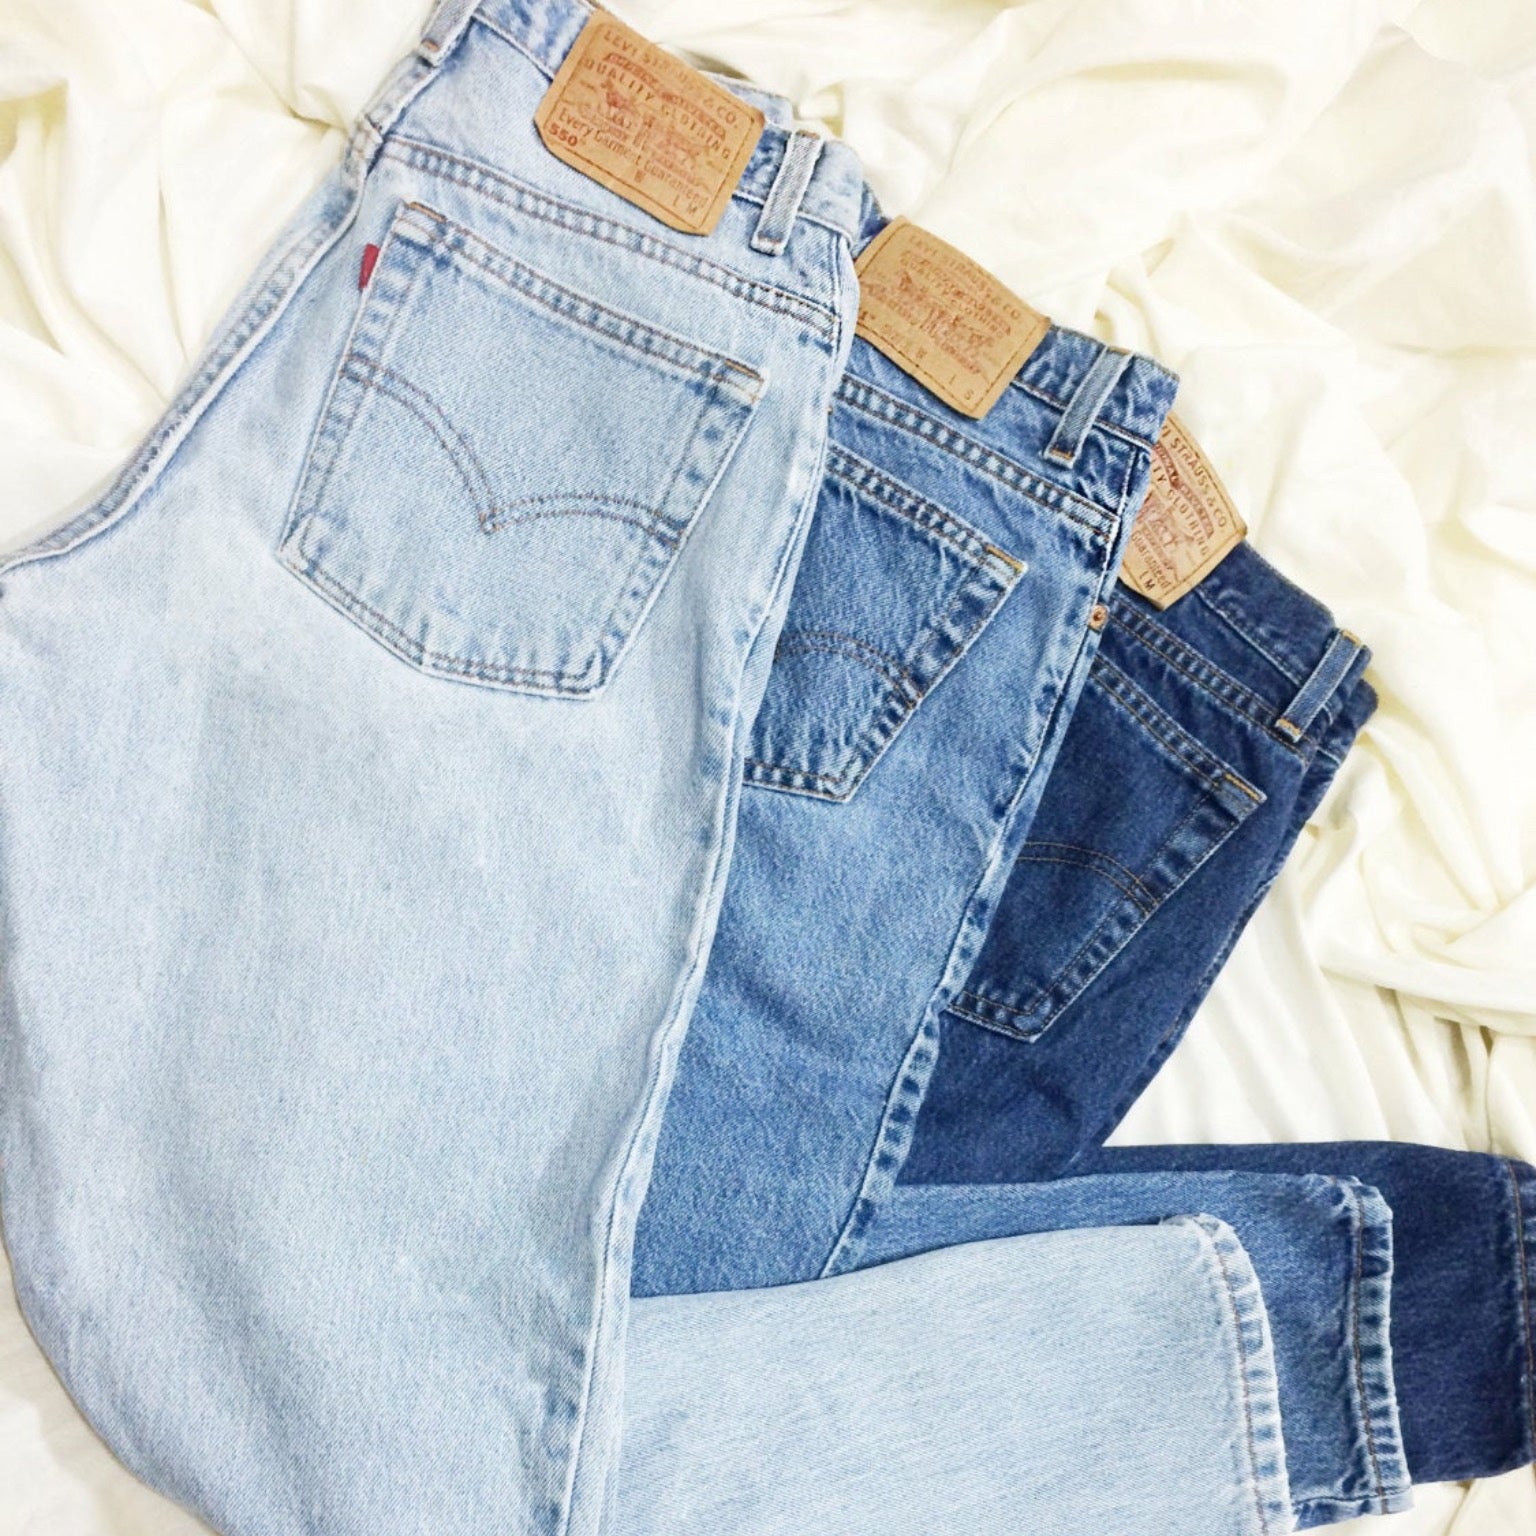 All Sizes Vintage High Waisted Tapered Levis Jeans